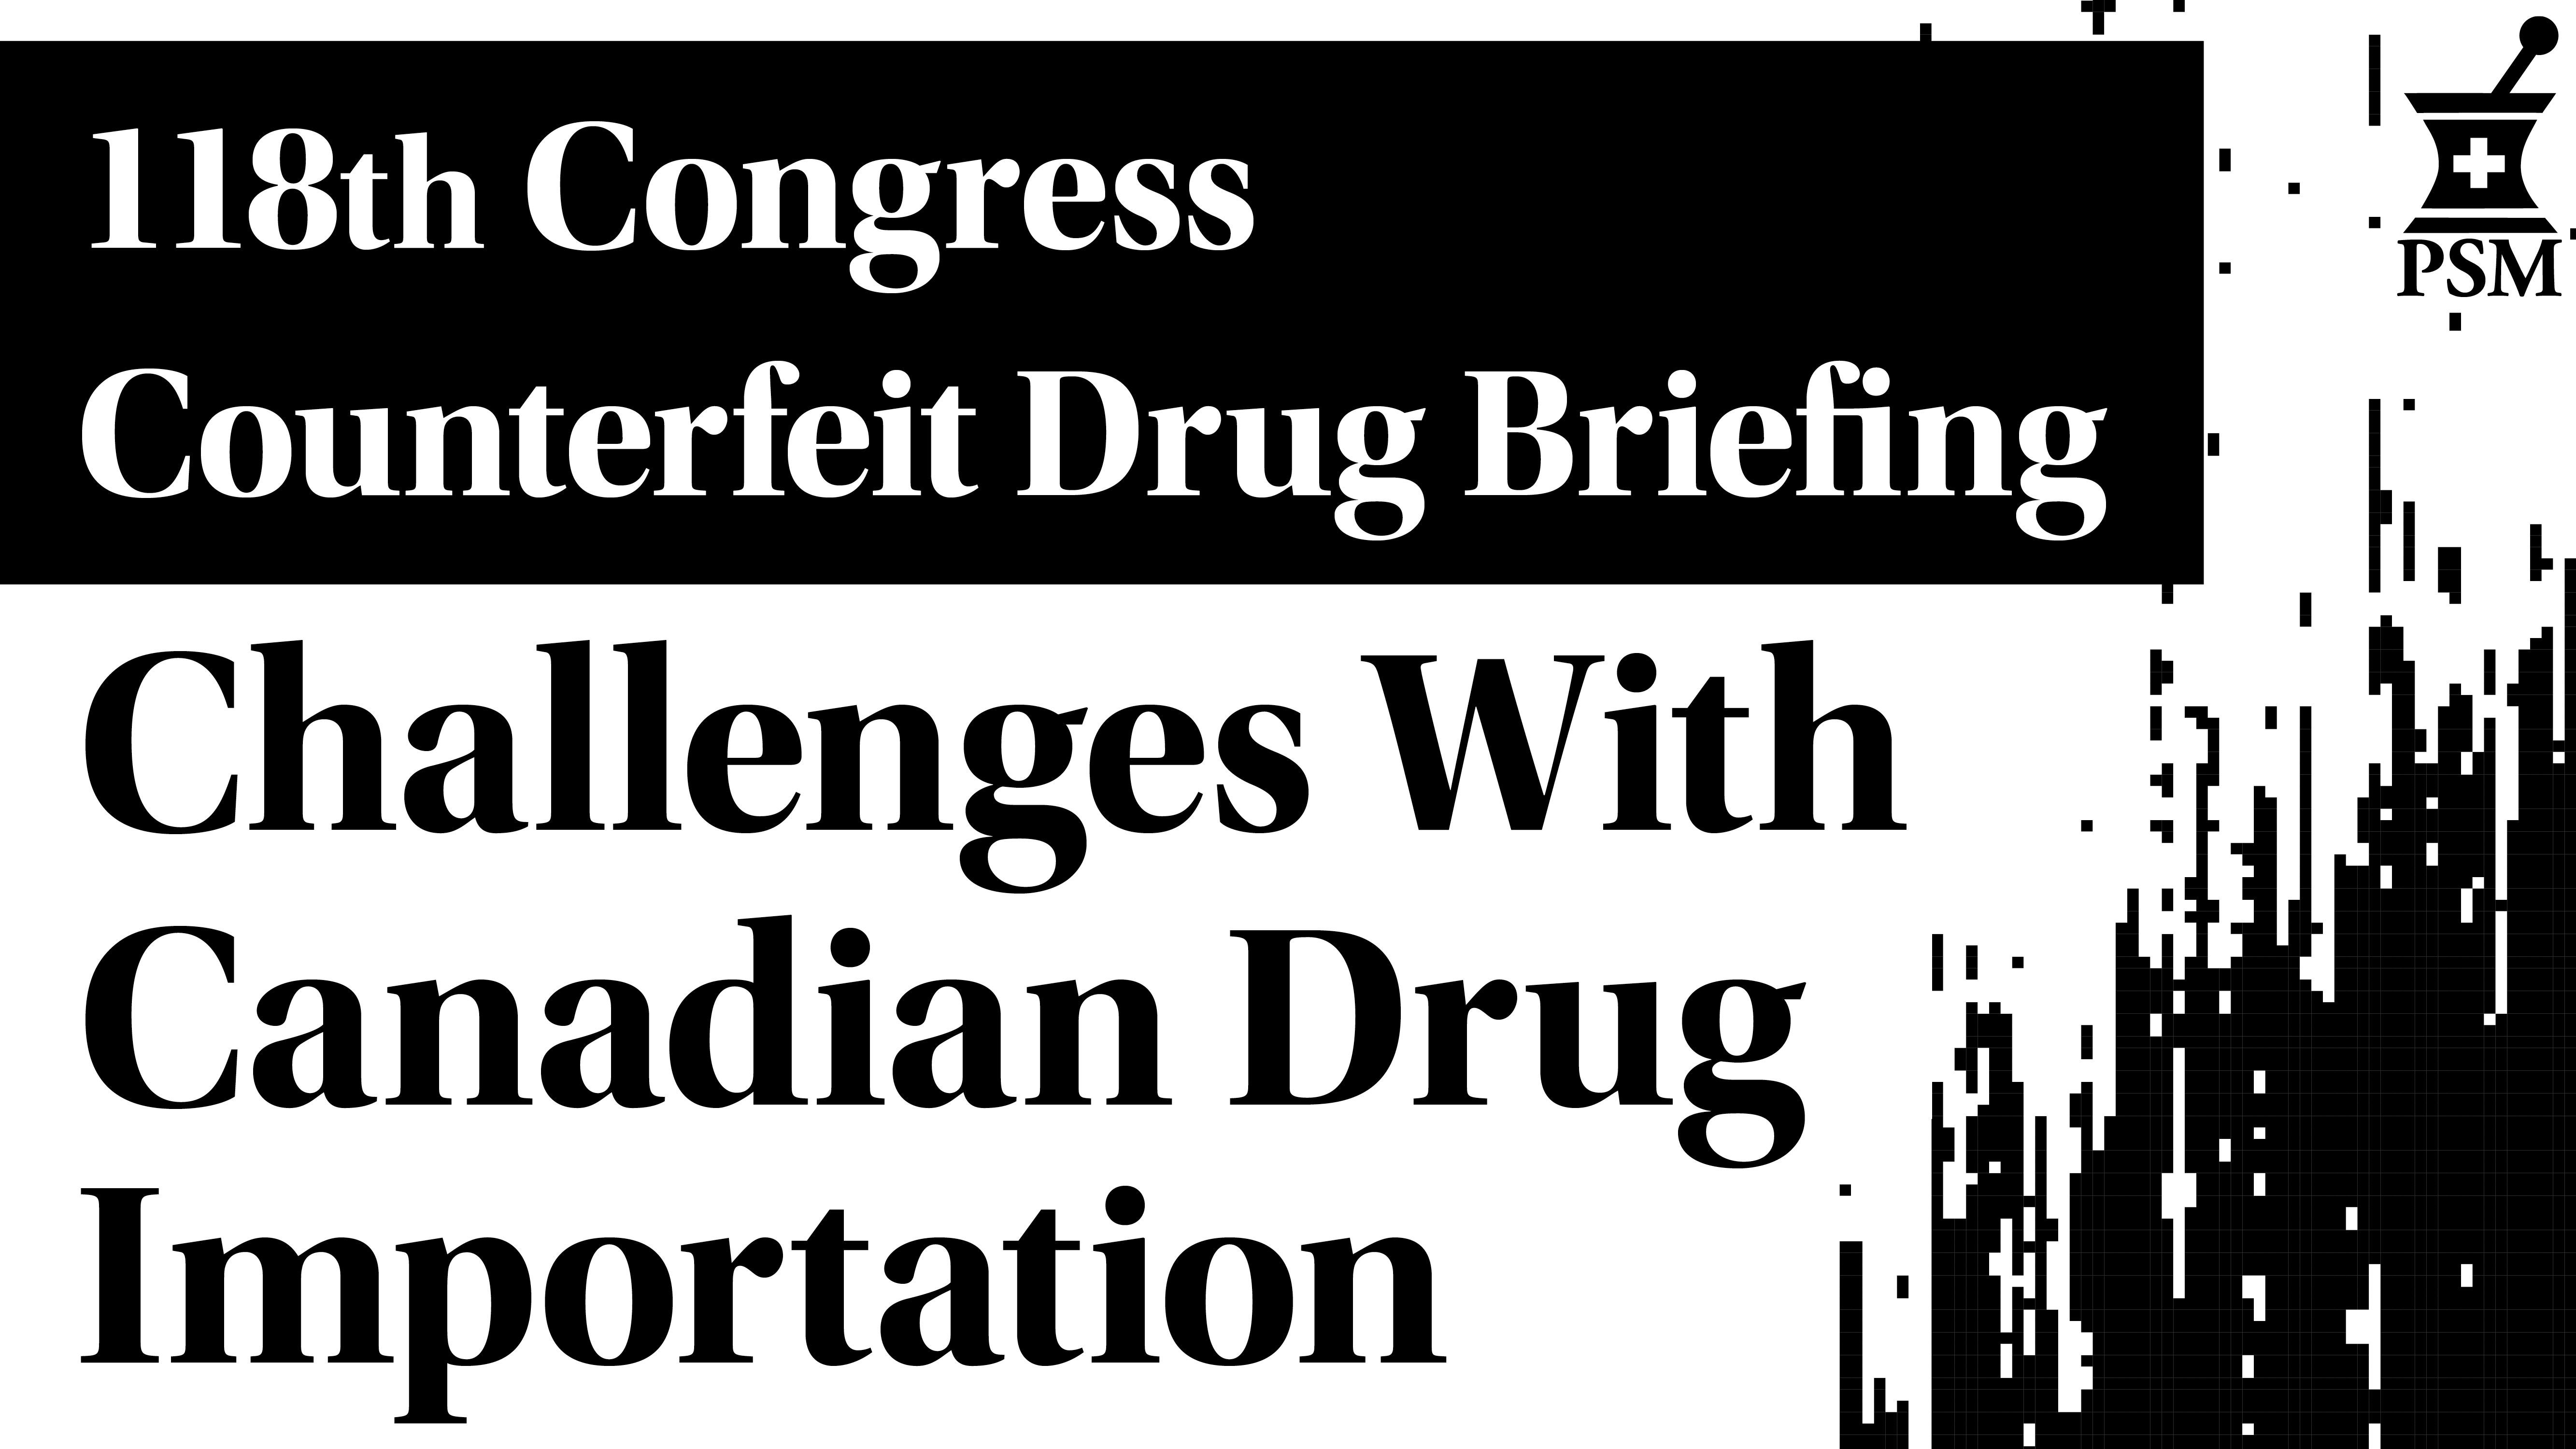 118th Congress Counterfeit Drug Briefing: Challenged with Canadian Drug Importation